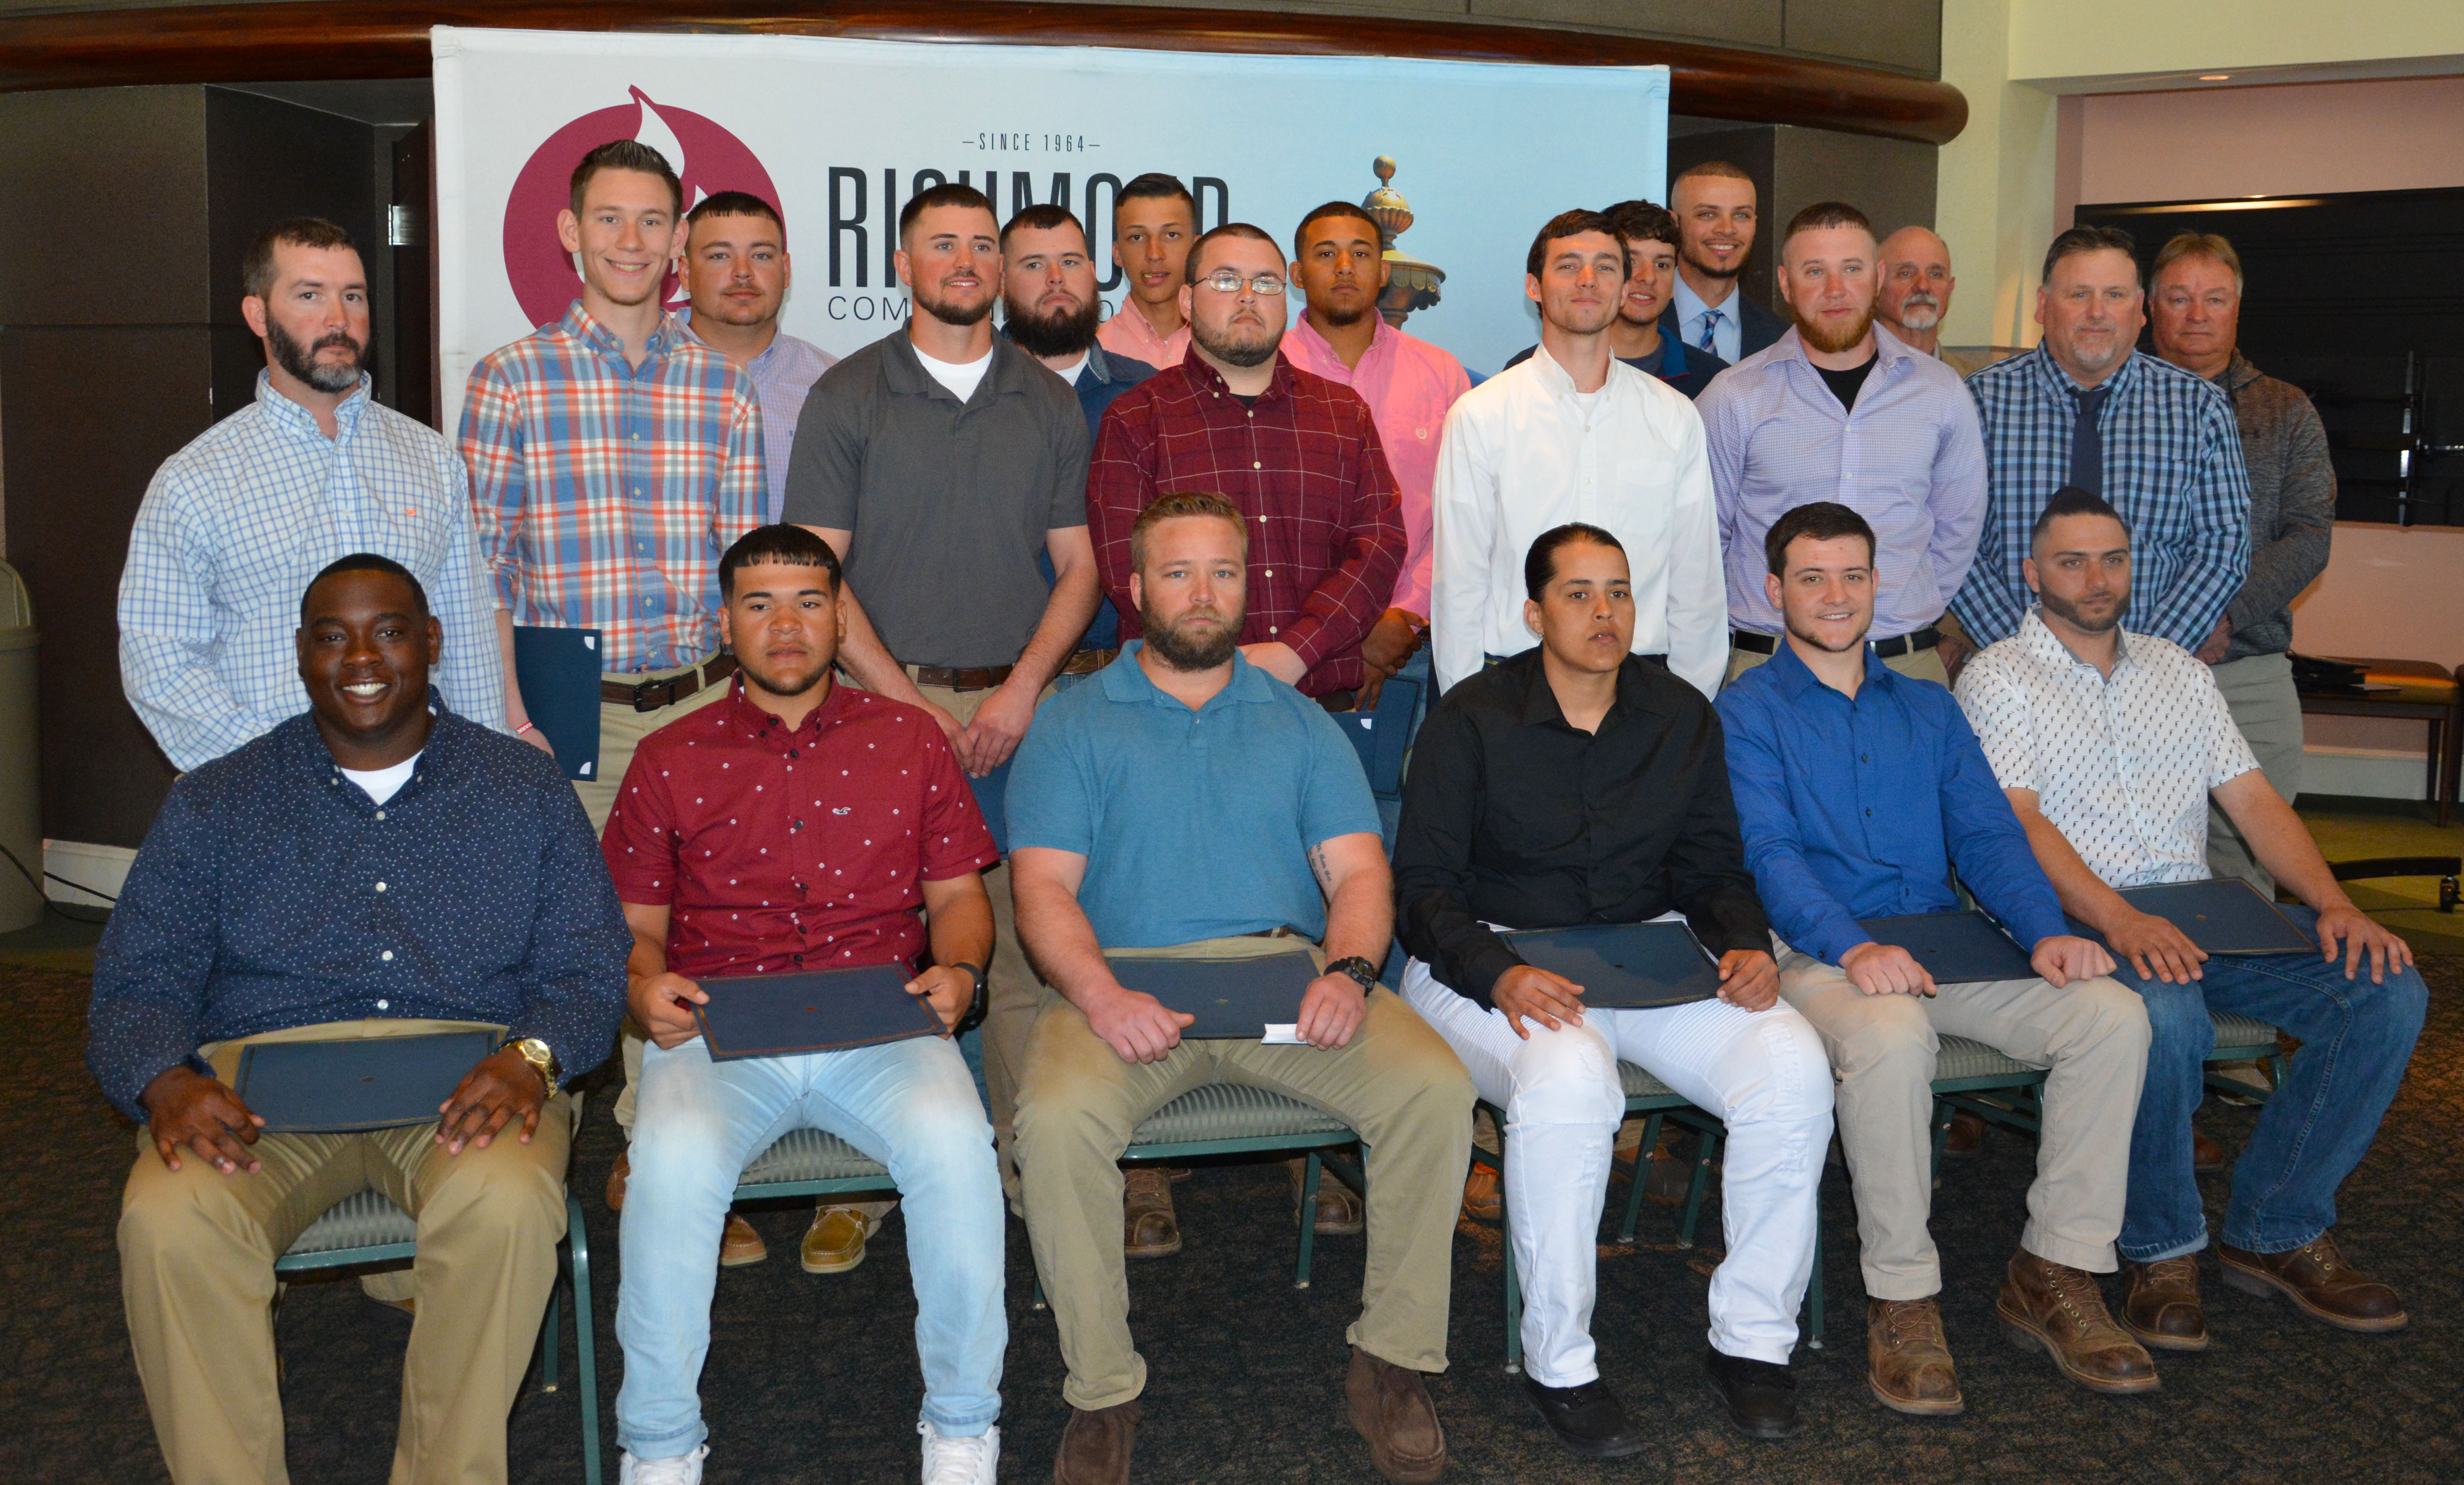 Pictured are the 18 students who graduated Feb. 8 from electric lineman program at Richmond Community College